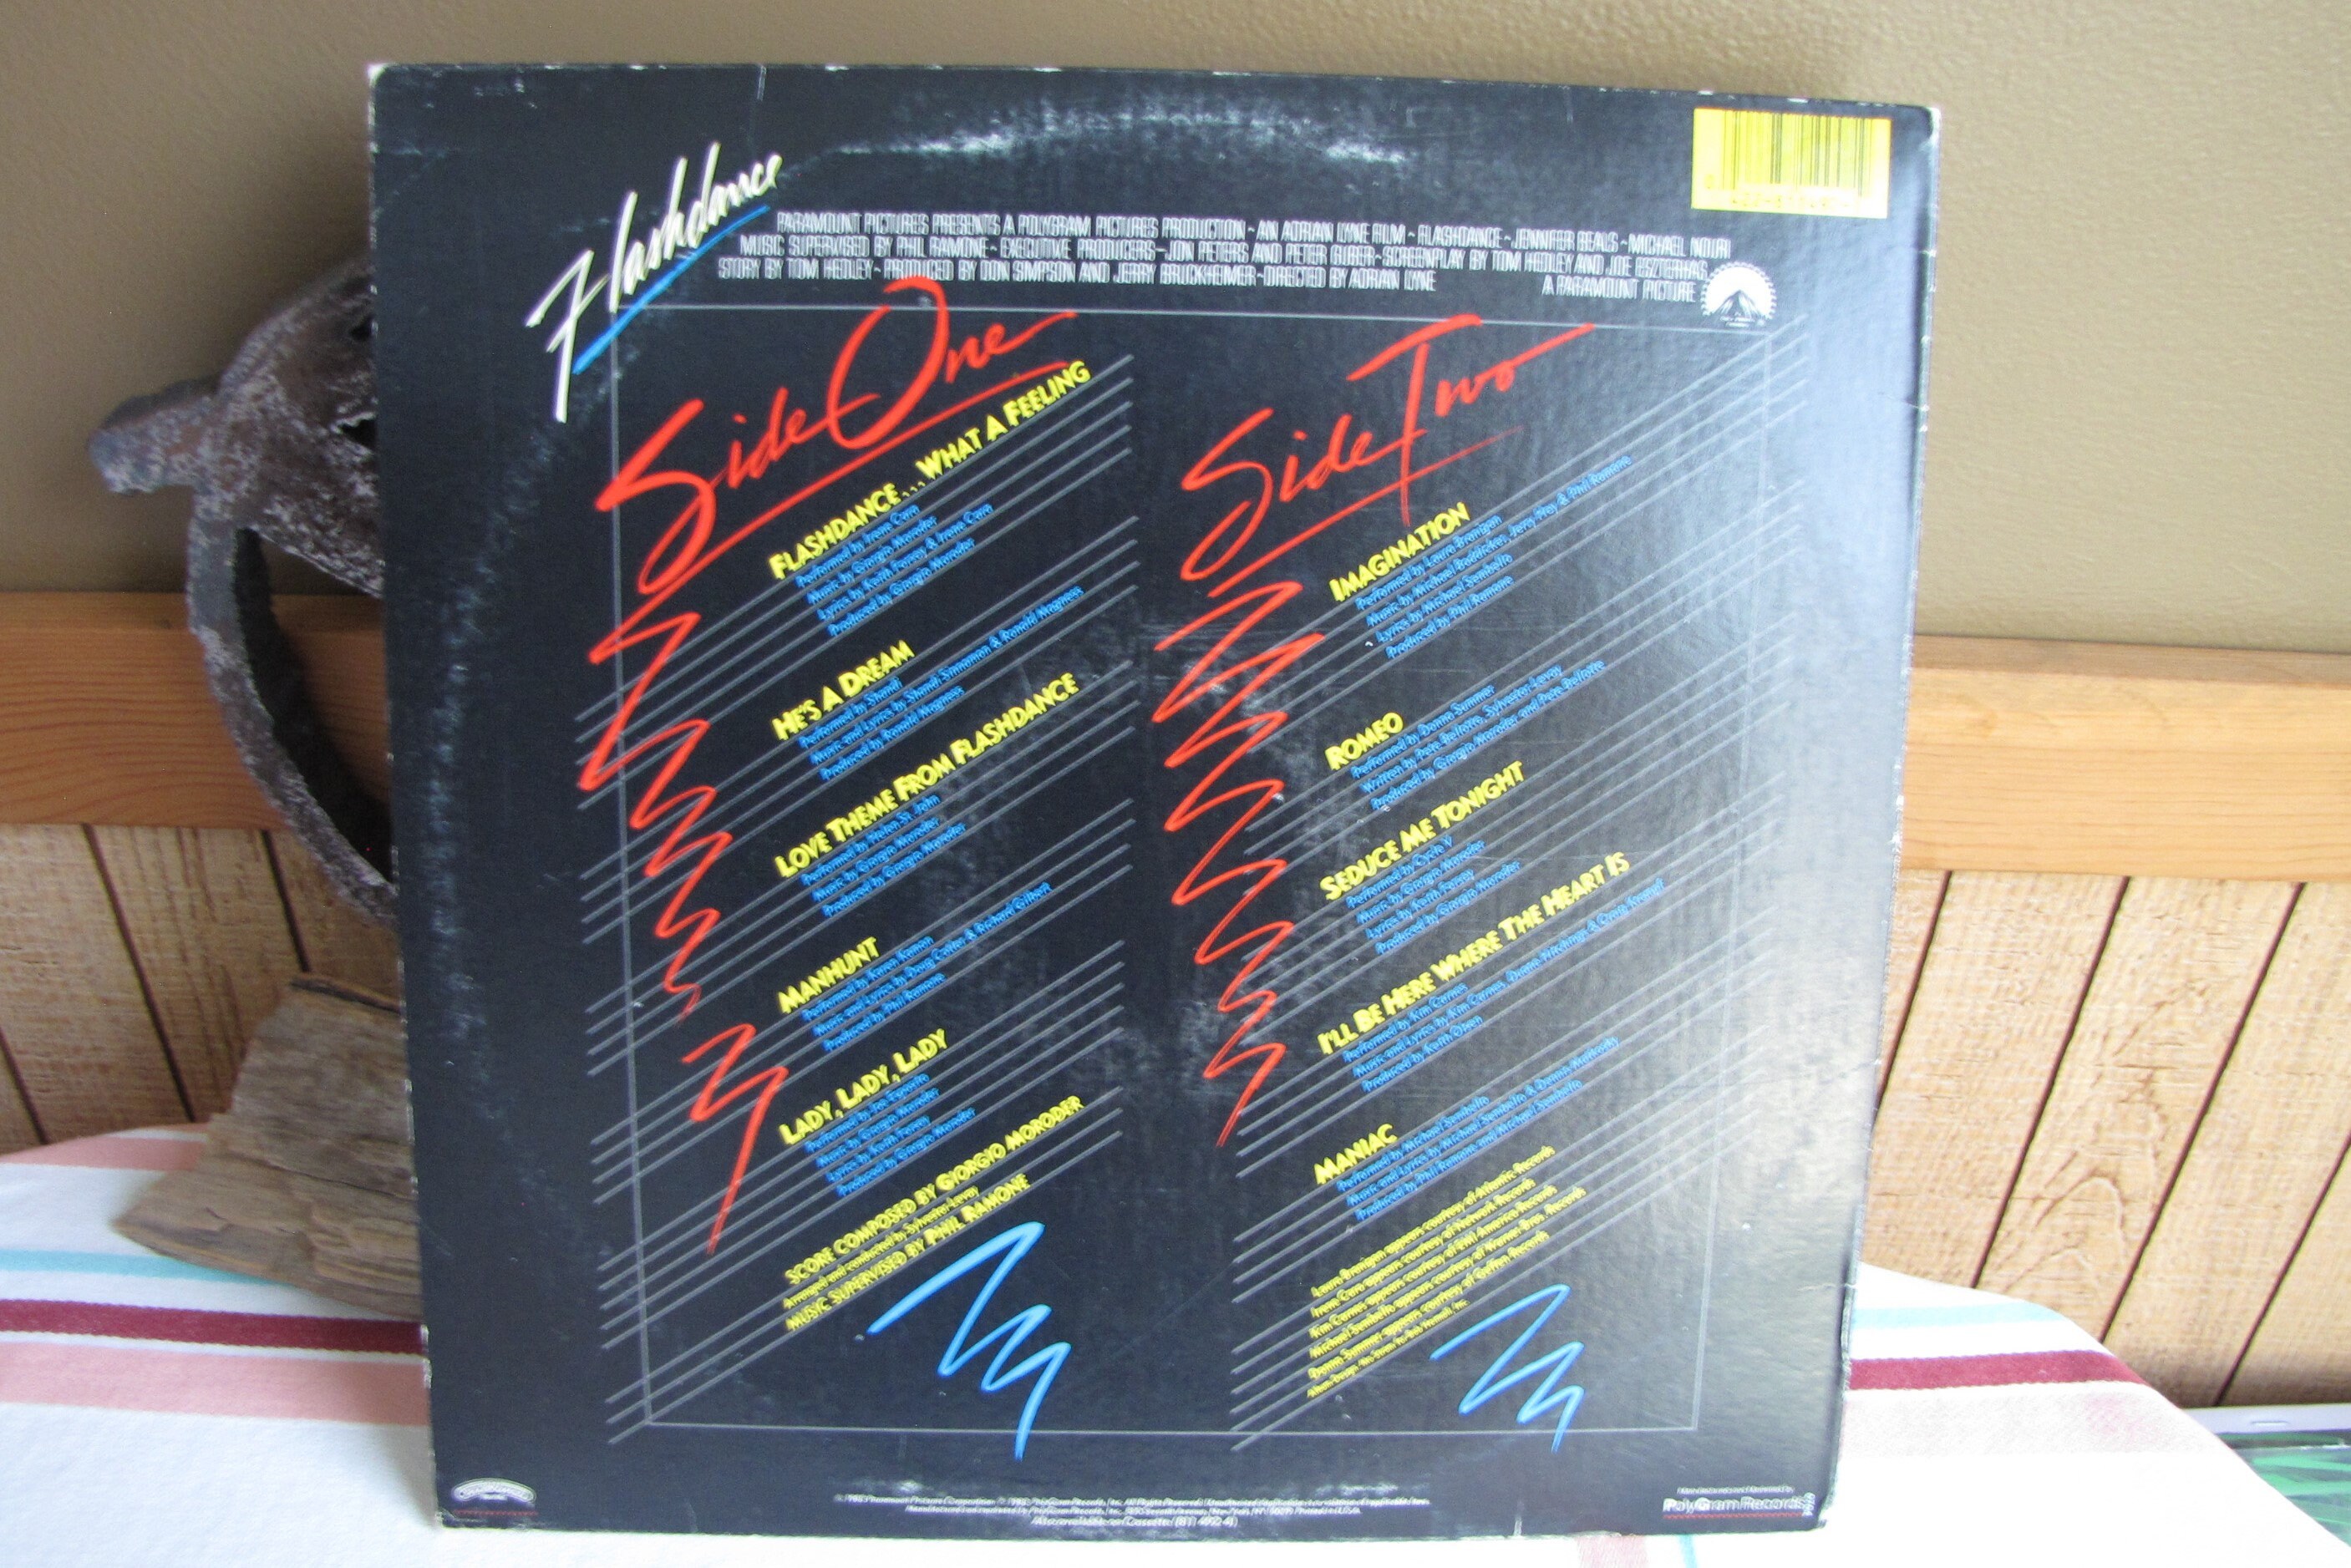 flashdance soundtrack review